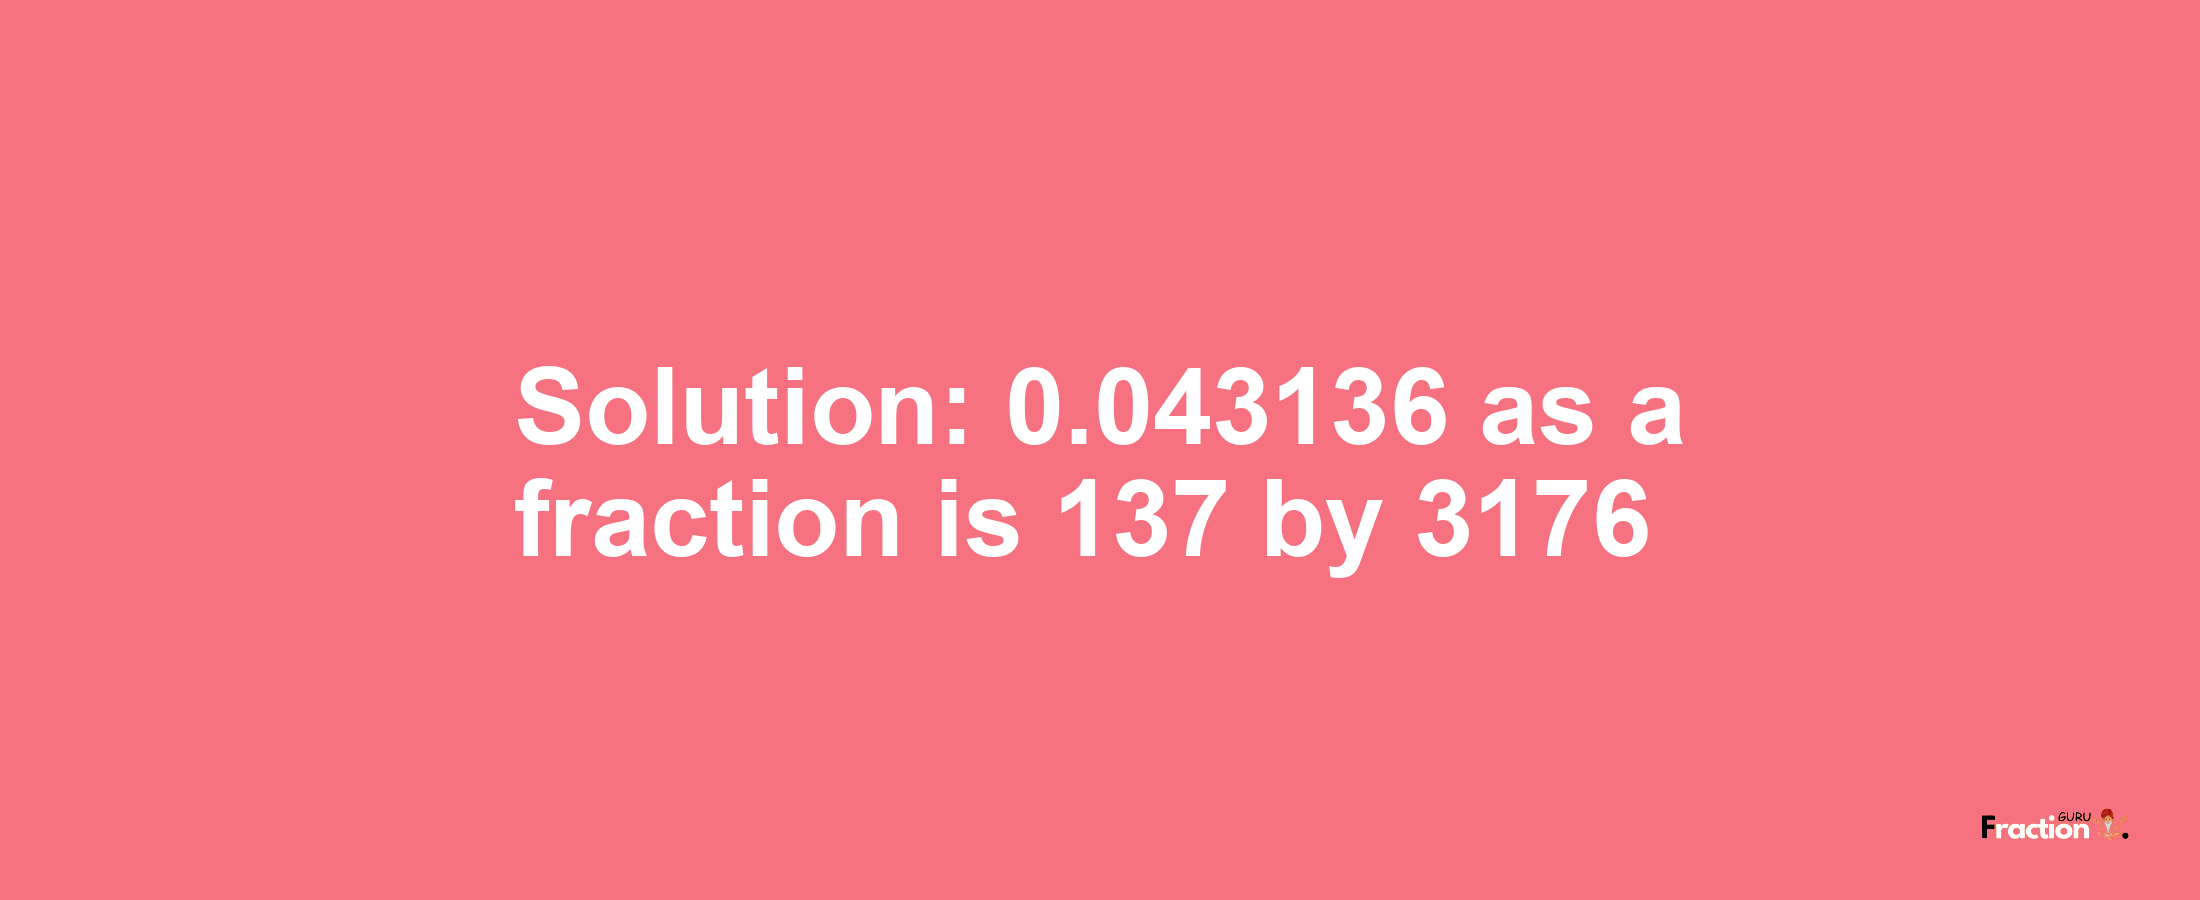 Solution:0.043136 as a fraction is 137/3176